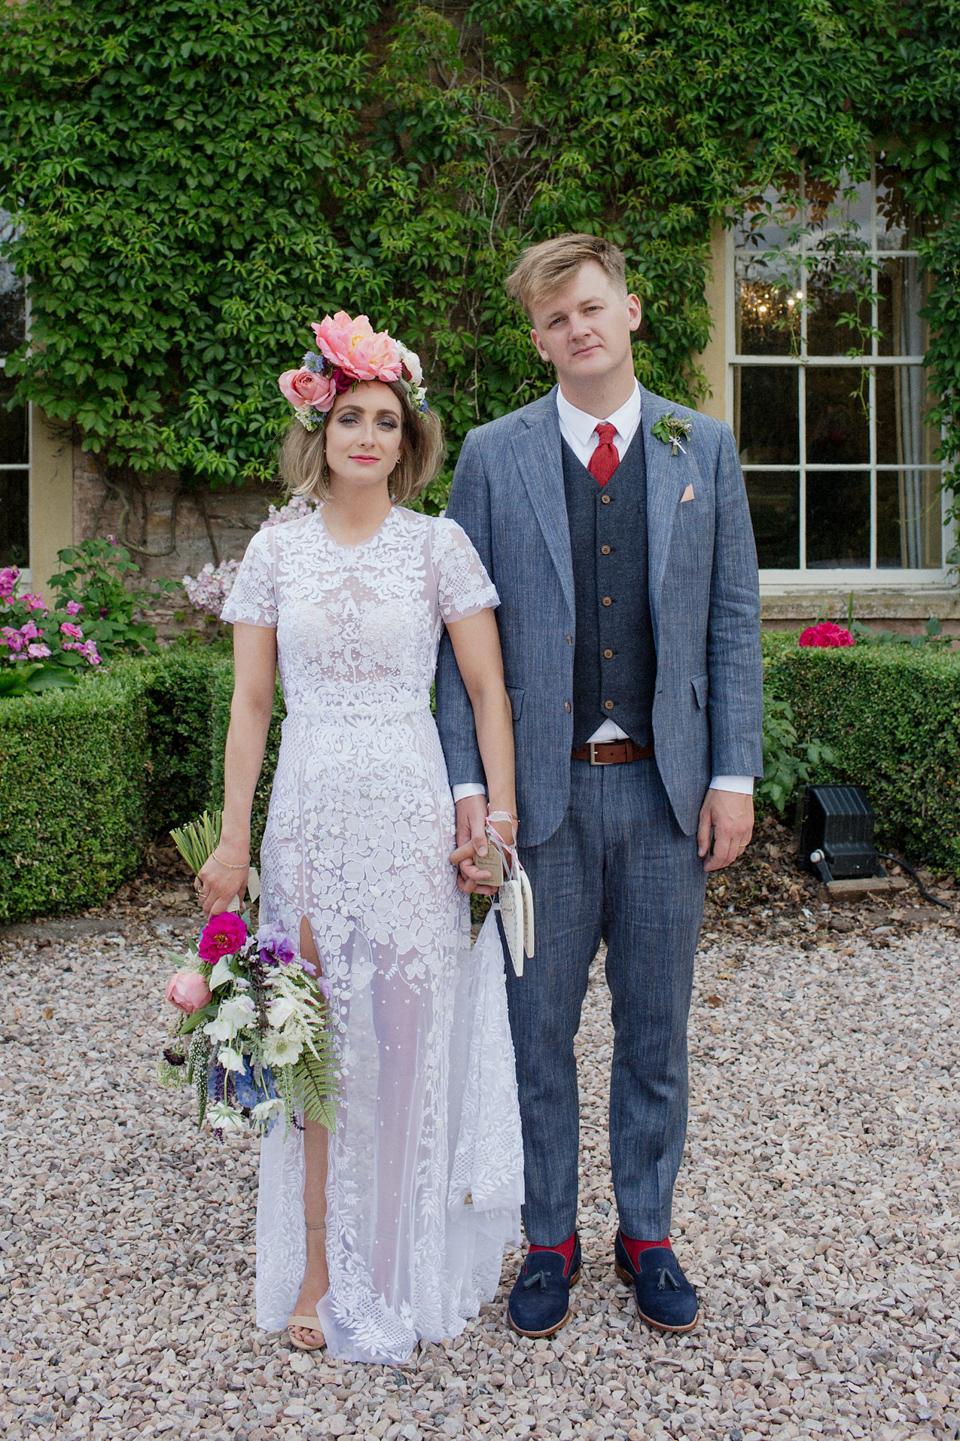 Bride Alex wore a Hermione de Paula gown for her modern, quirky wedding at Maunsel House in Somerset. Photography by Karolina of Hearts on Fire.